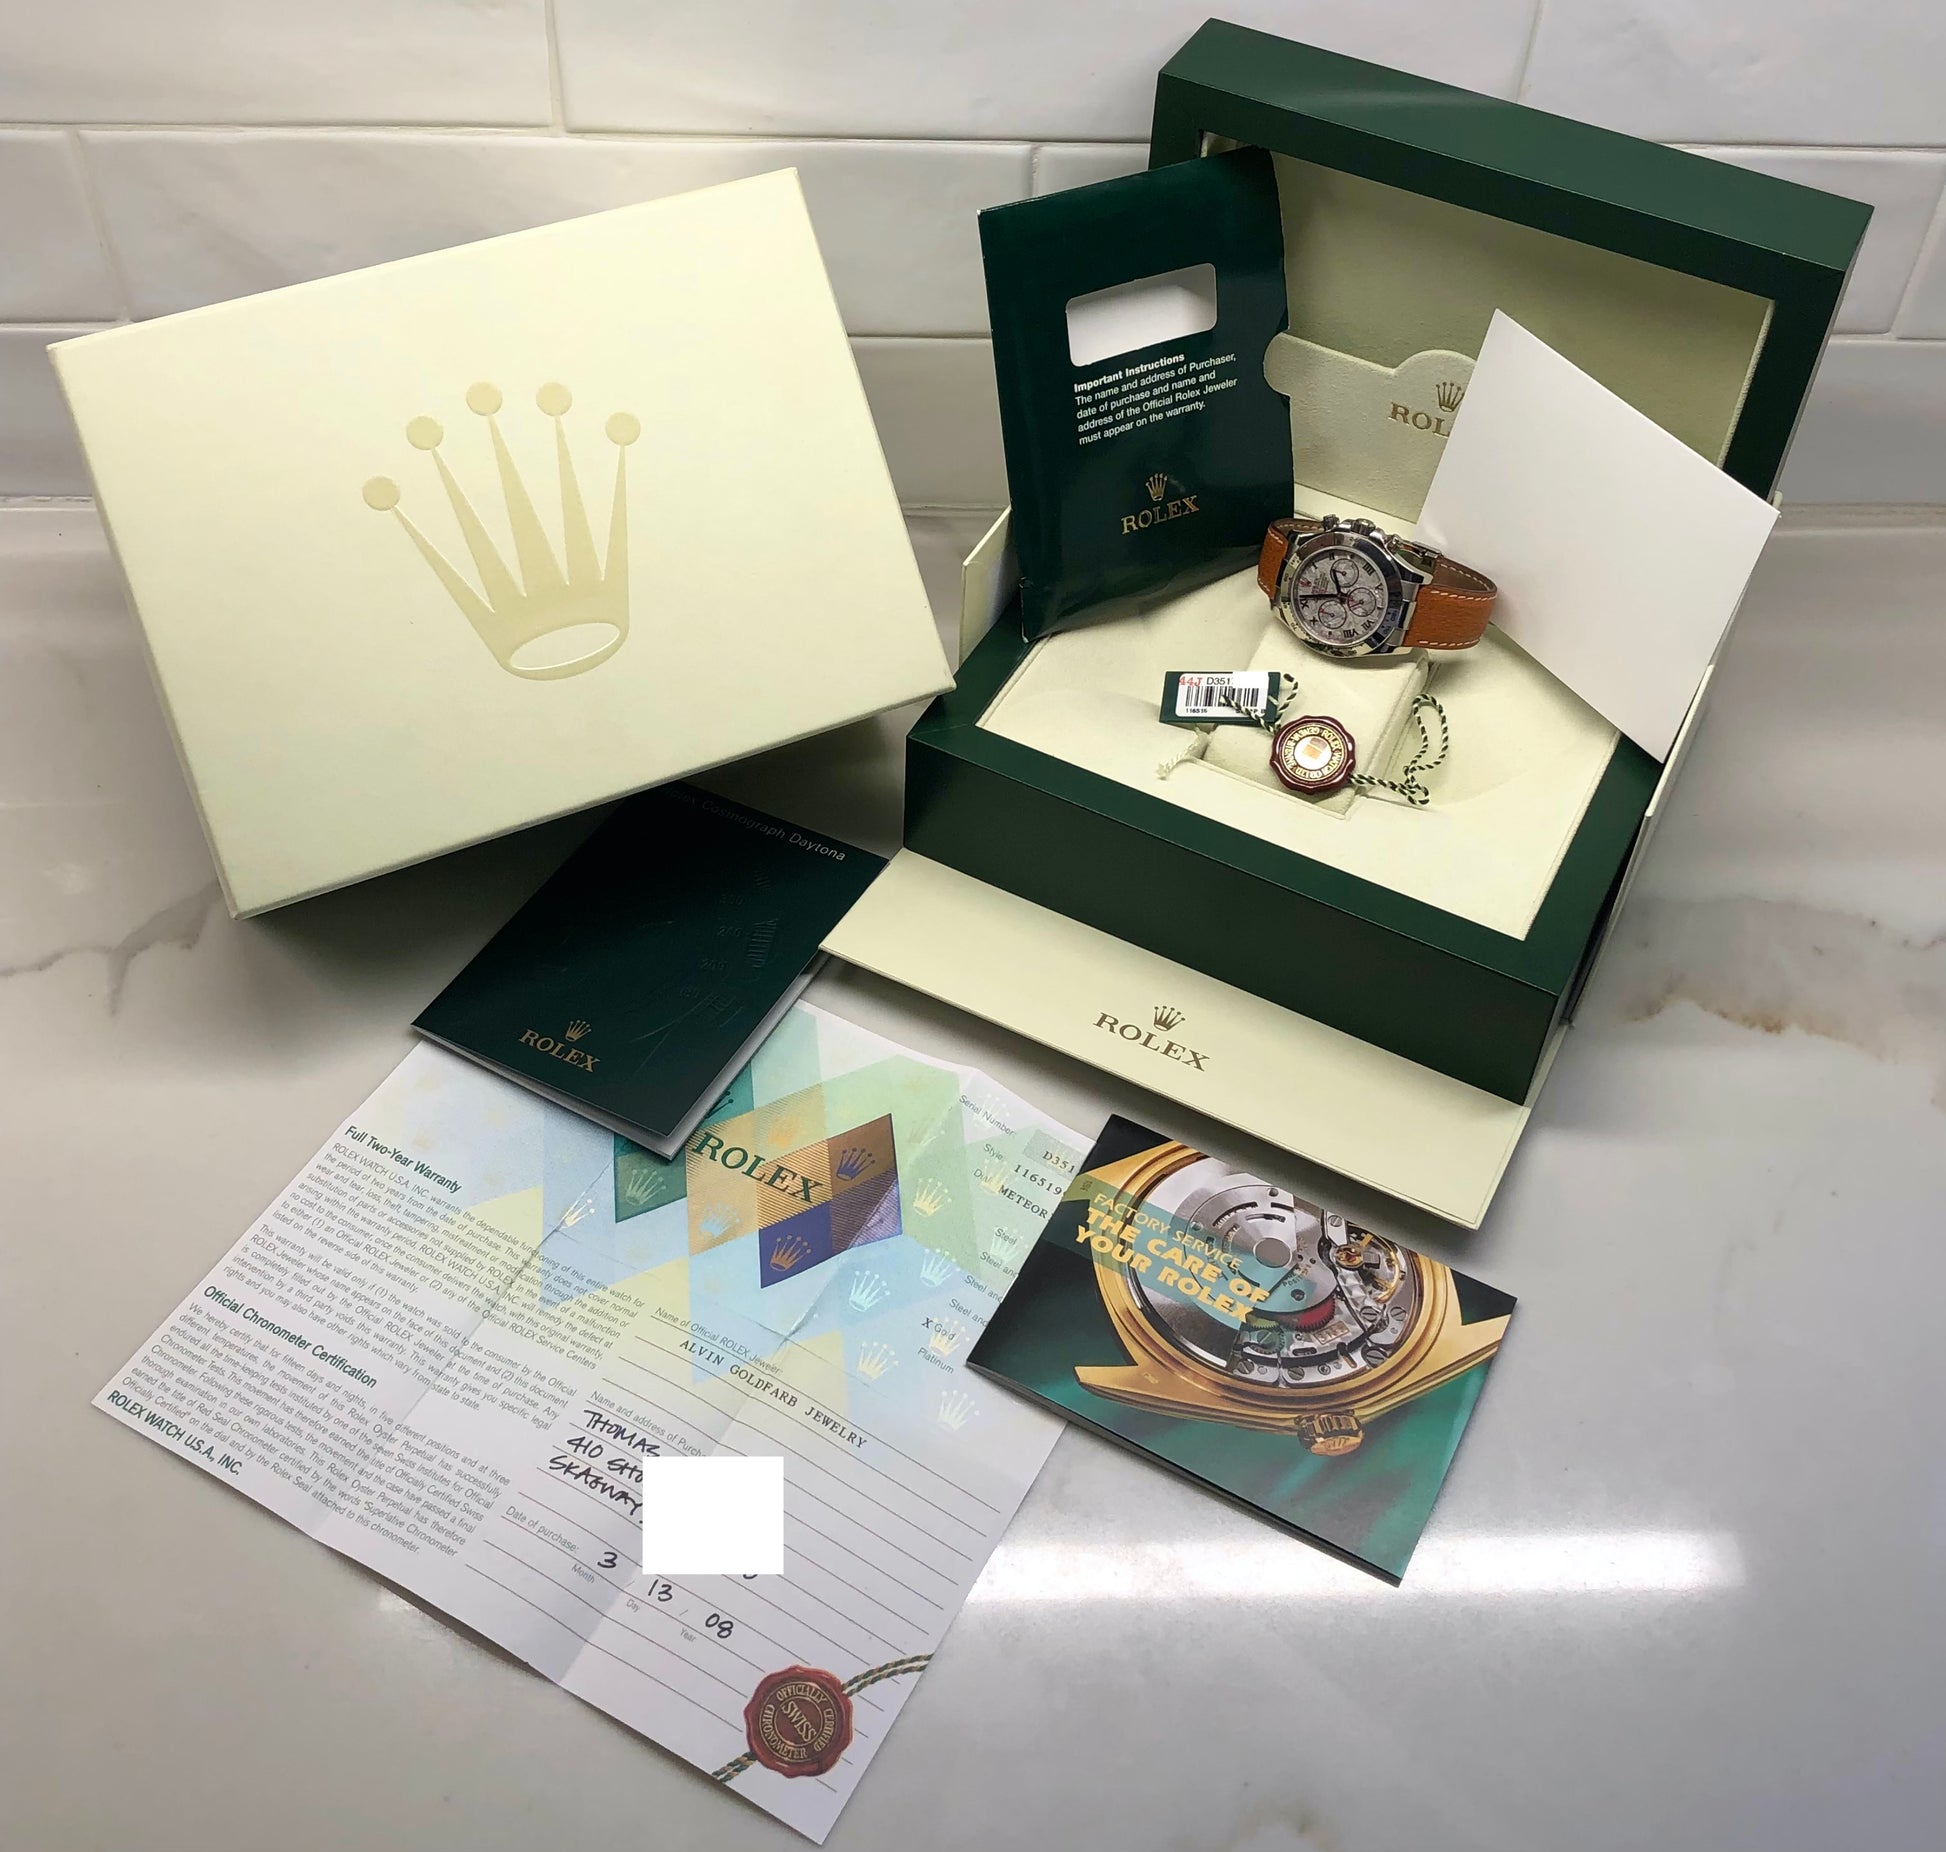 2005 Rolex Daytona Cosmograph 116519 Meteroite 18K White Gold Chronograph Wristwatch with Box and Papers - HASHTAGWATCHCO